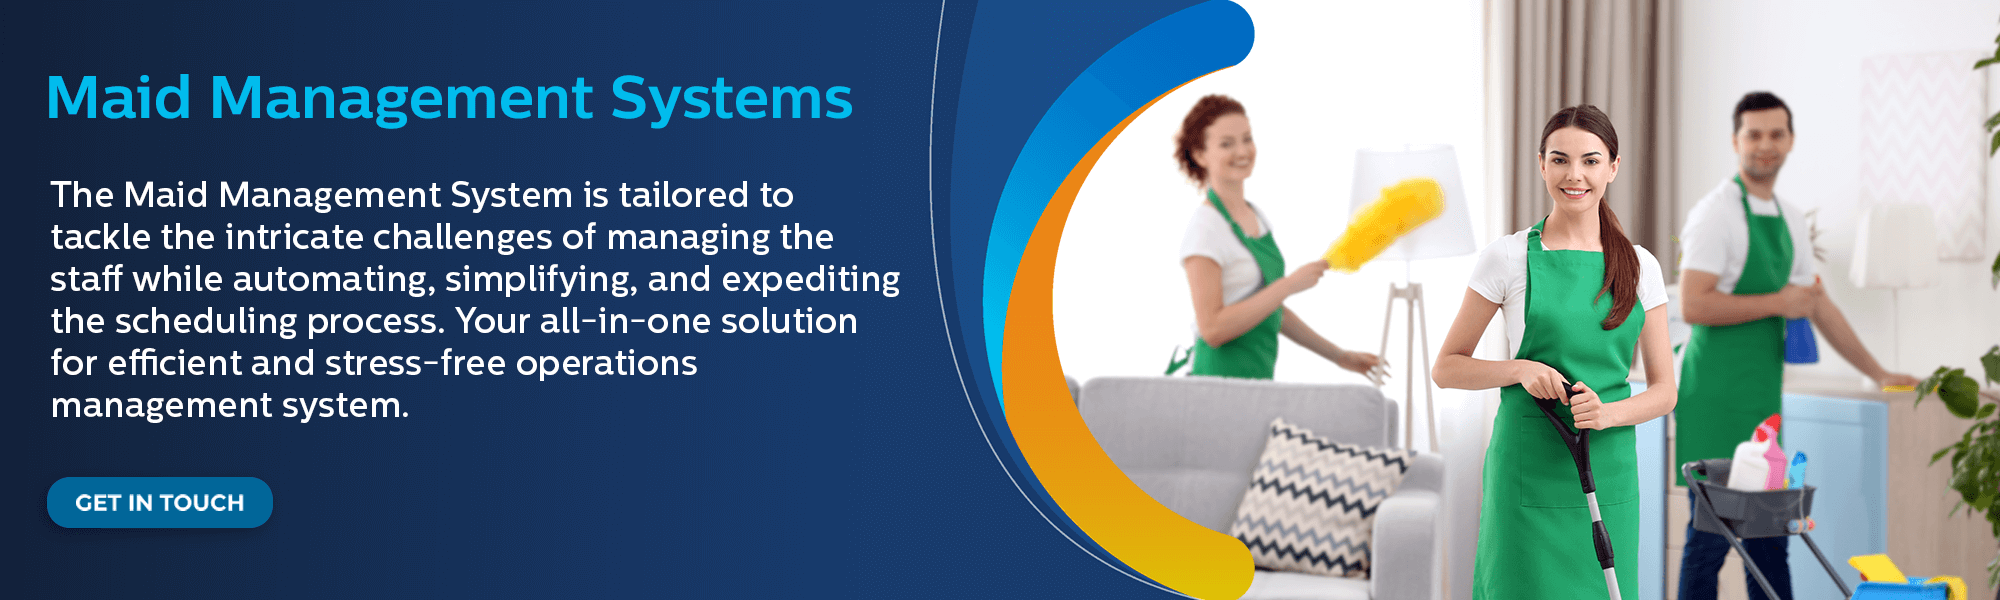 maid management systems